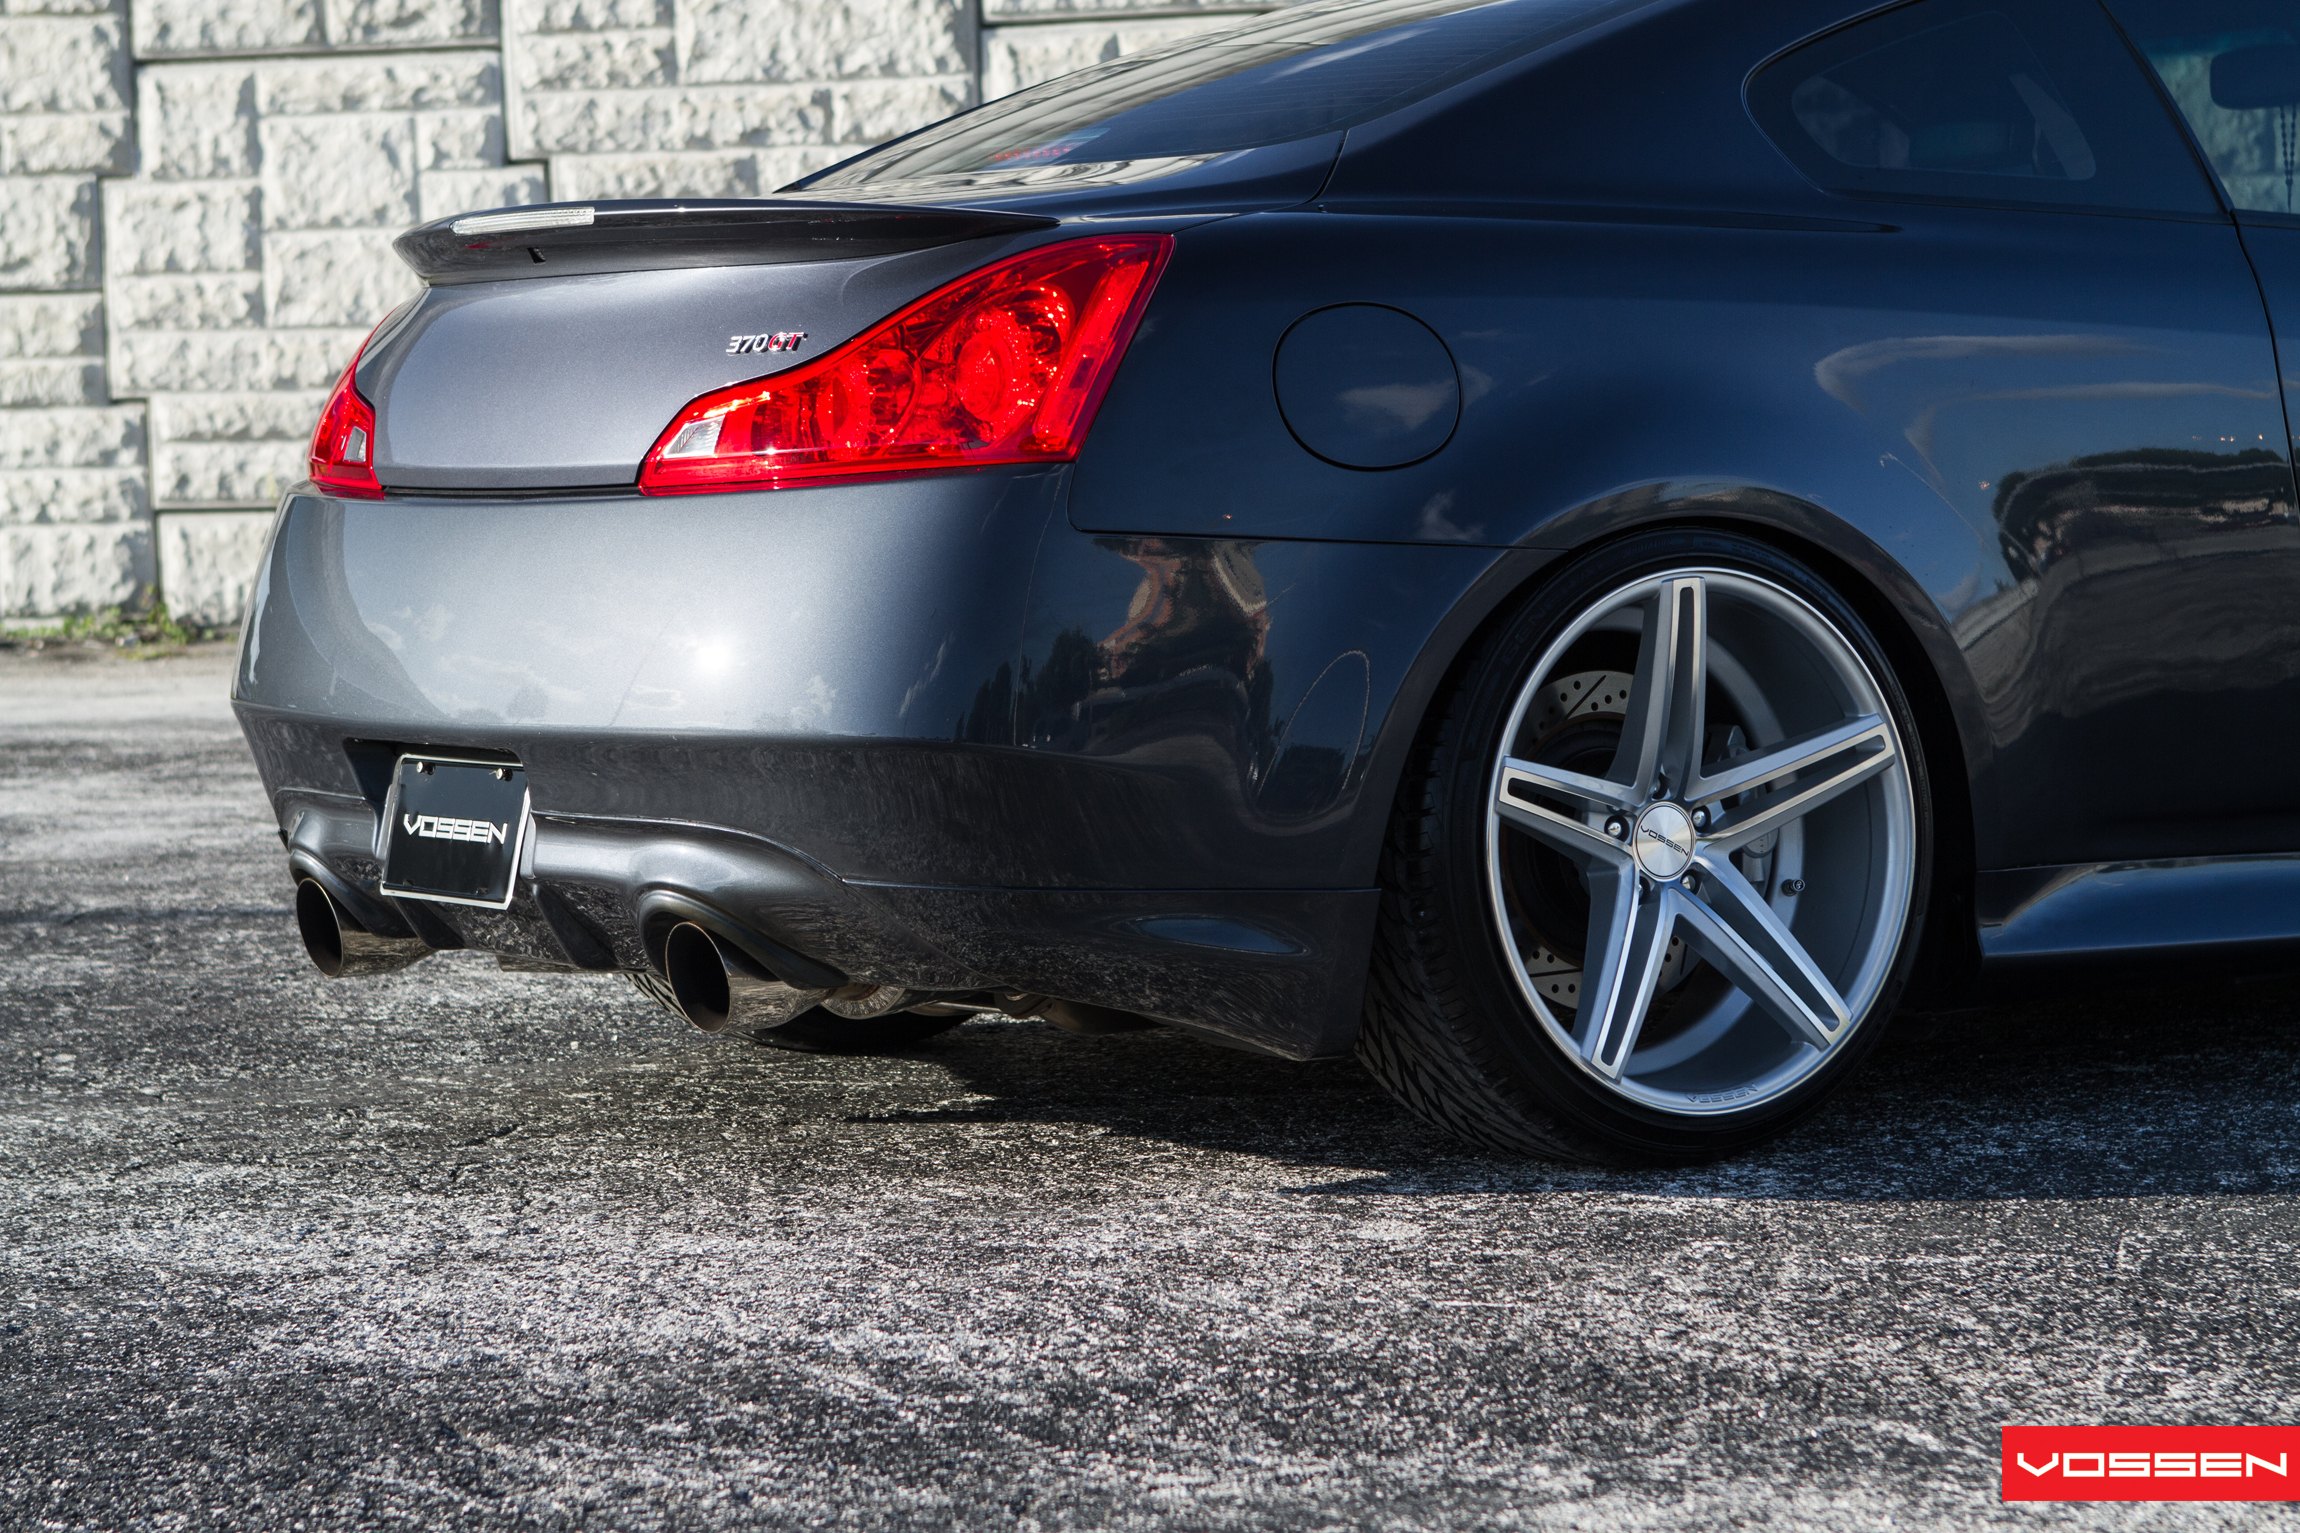 Rear Spoiler with Light on Gray Infiniti G37 - Photo by Vossen